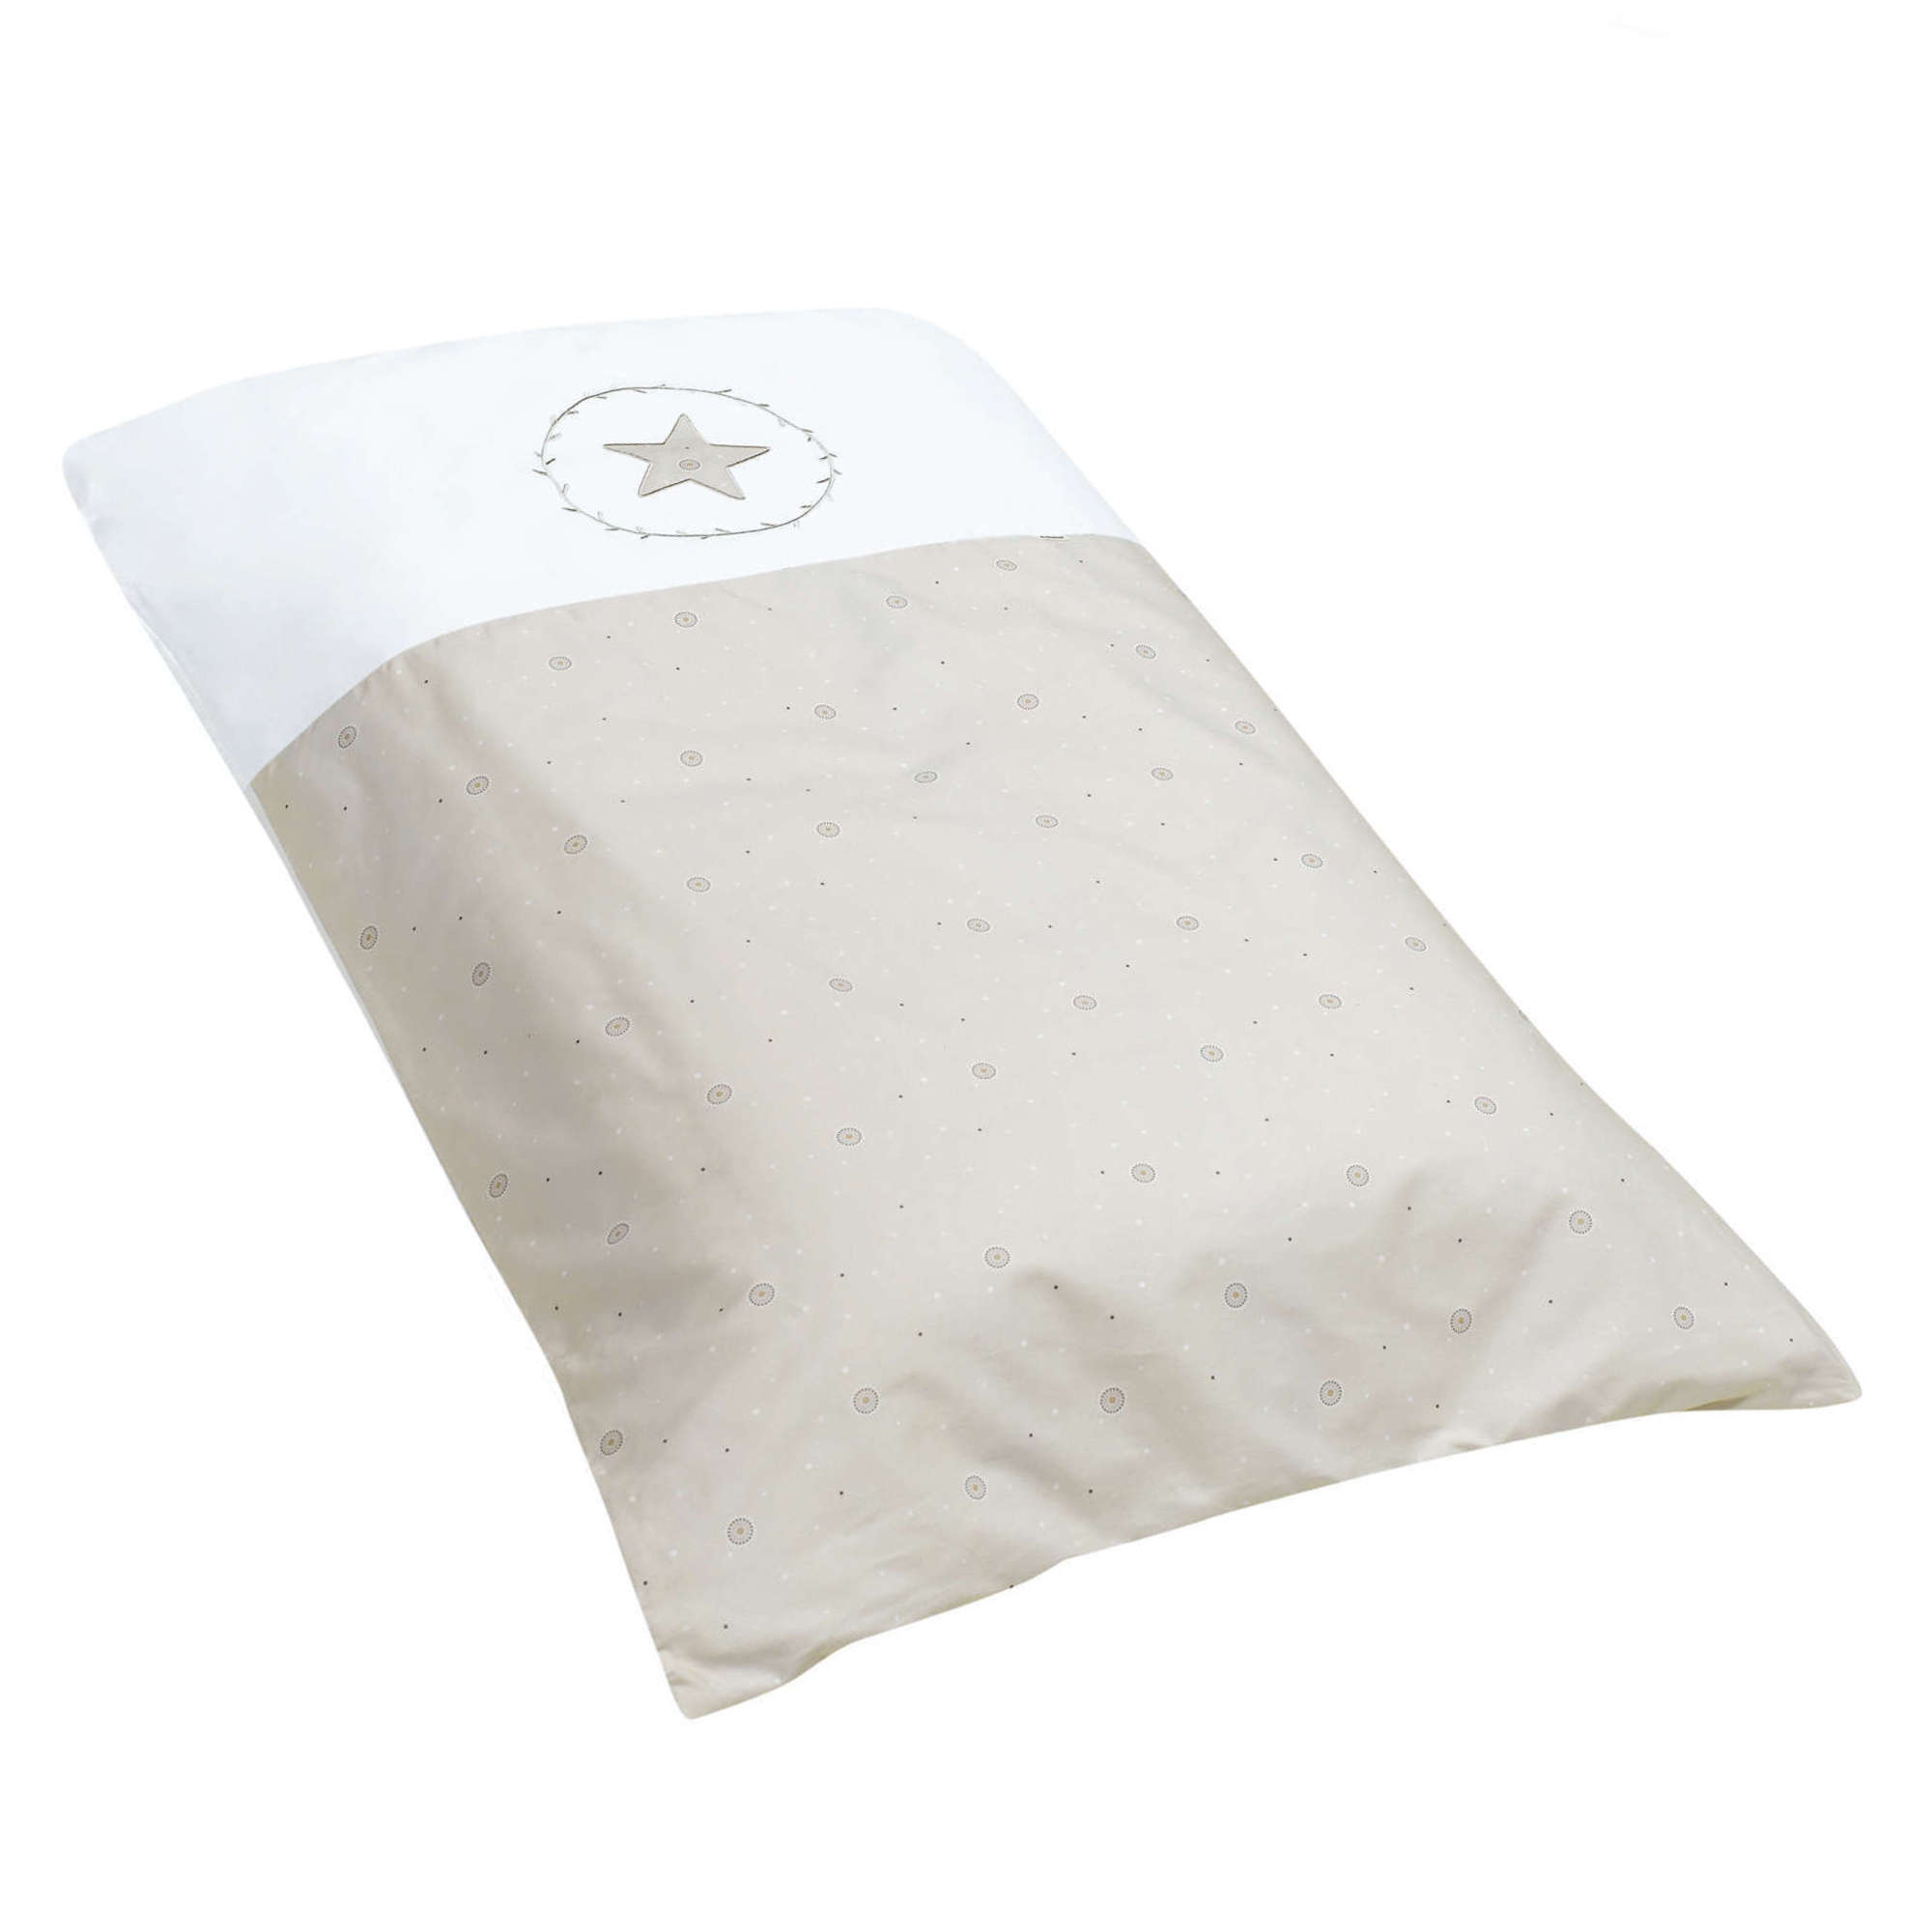 Cot duvet Vento 70x140cm with removable cover